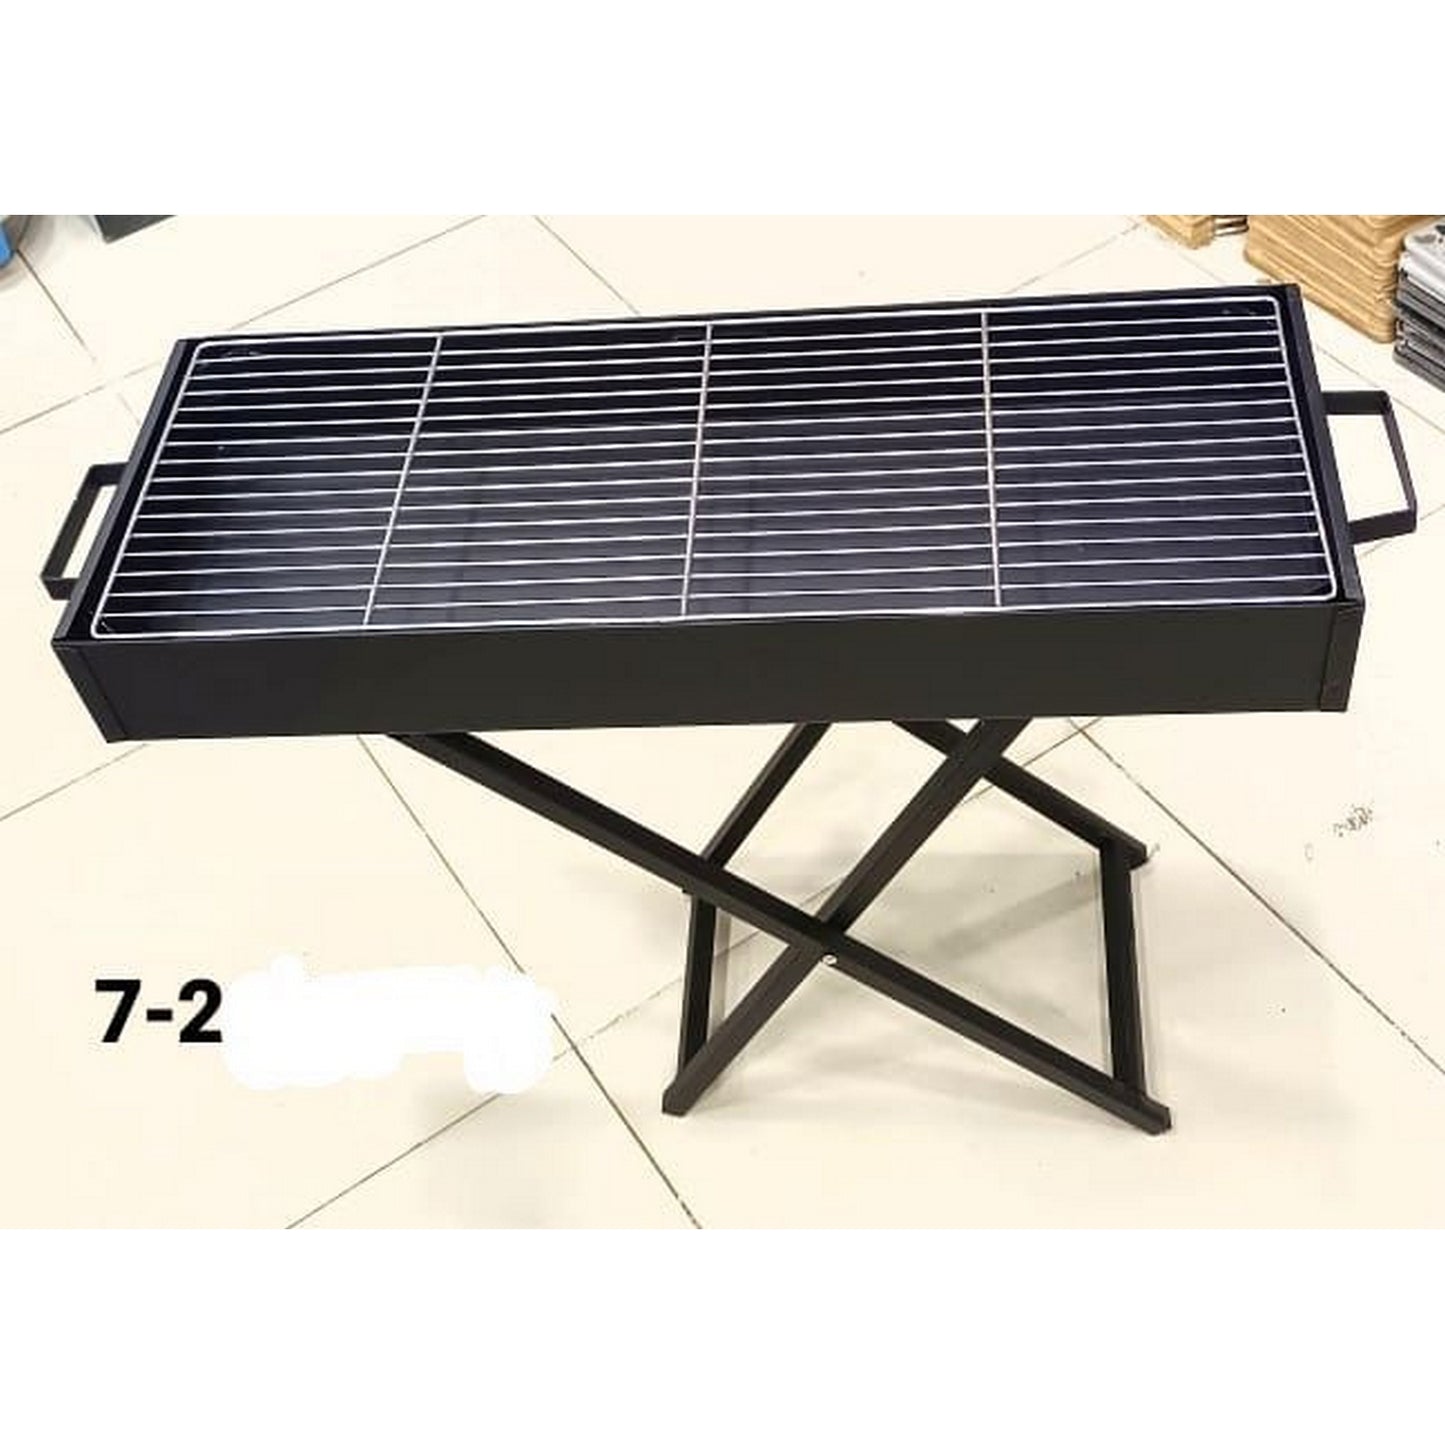 Folding Barbecue Grill Portable Heavy Quality Commercial Use